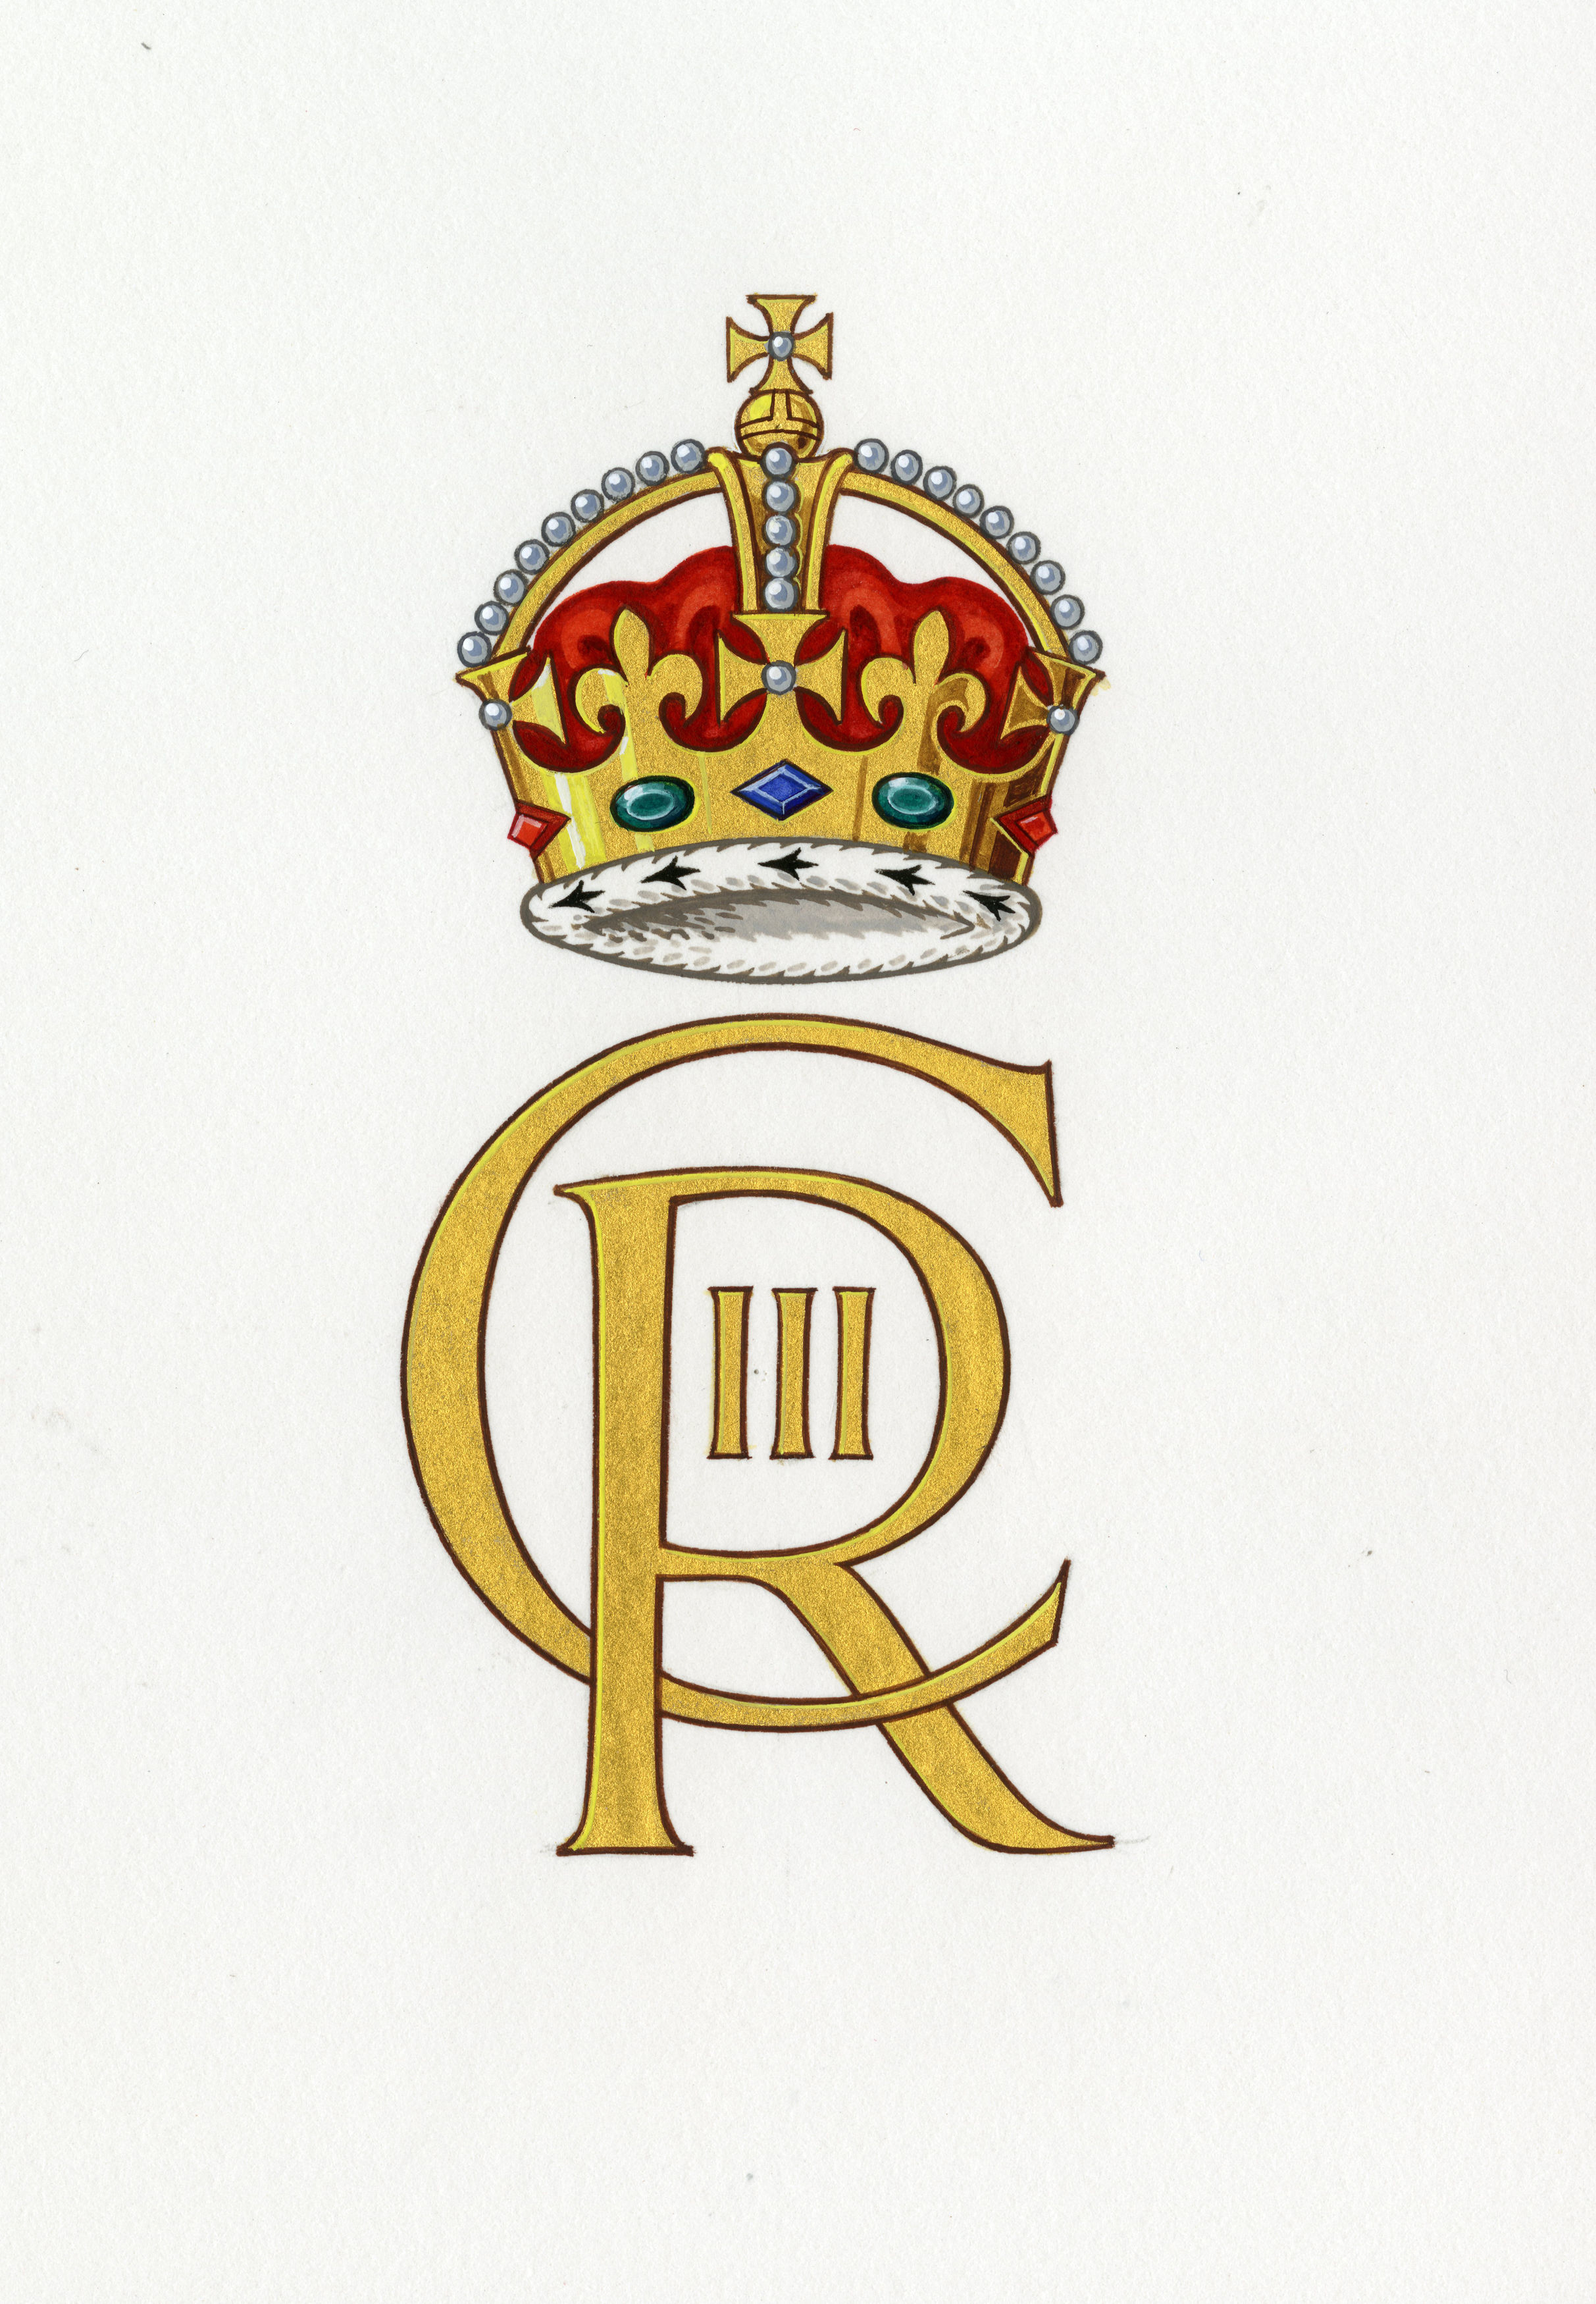 <p>On Sept. 26, 2022 -- the final official day of mourning following Queen Elizabeth II's death -- Buckingham Palace issued this image of the new cypher that will be used by King Charles III. The cypher is the sovereign's monogram, consisting of the first initial of the monarch's name and title, Rex (Latin for kin), alongside a representation of the crown. The cypher is the personal property of the king and was selected by Charles from a series of designs prepared by Buckingham Palace's heraldry experts, the College of Arms. It will begin to <span>replace his mother's "ERII" cypher that for decades appeared on mail postmarks, state documents, government departments and, eventually, all those classic red mailboxes that are sprinkled around the U.K.</span></p>